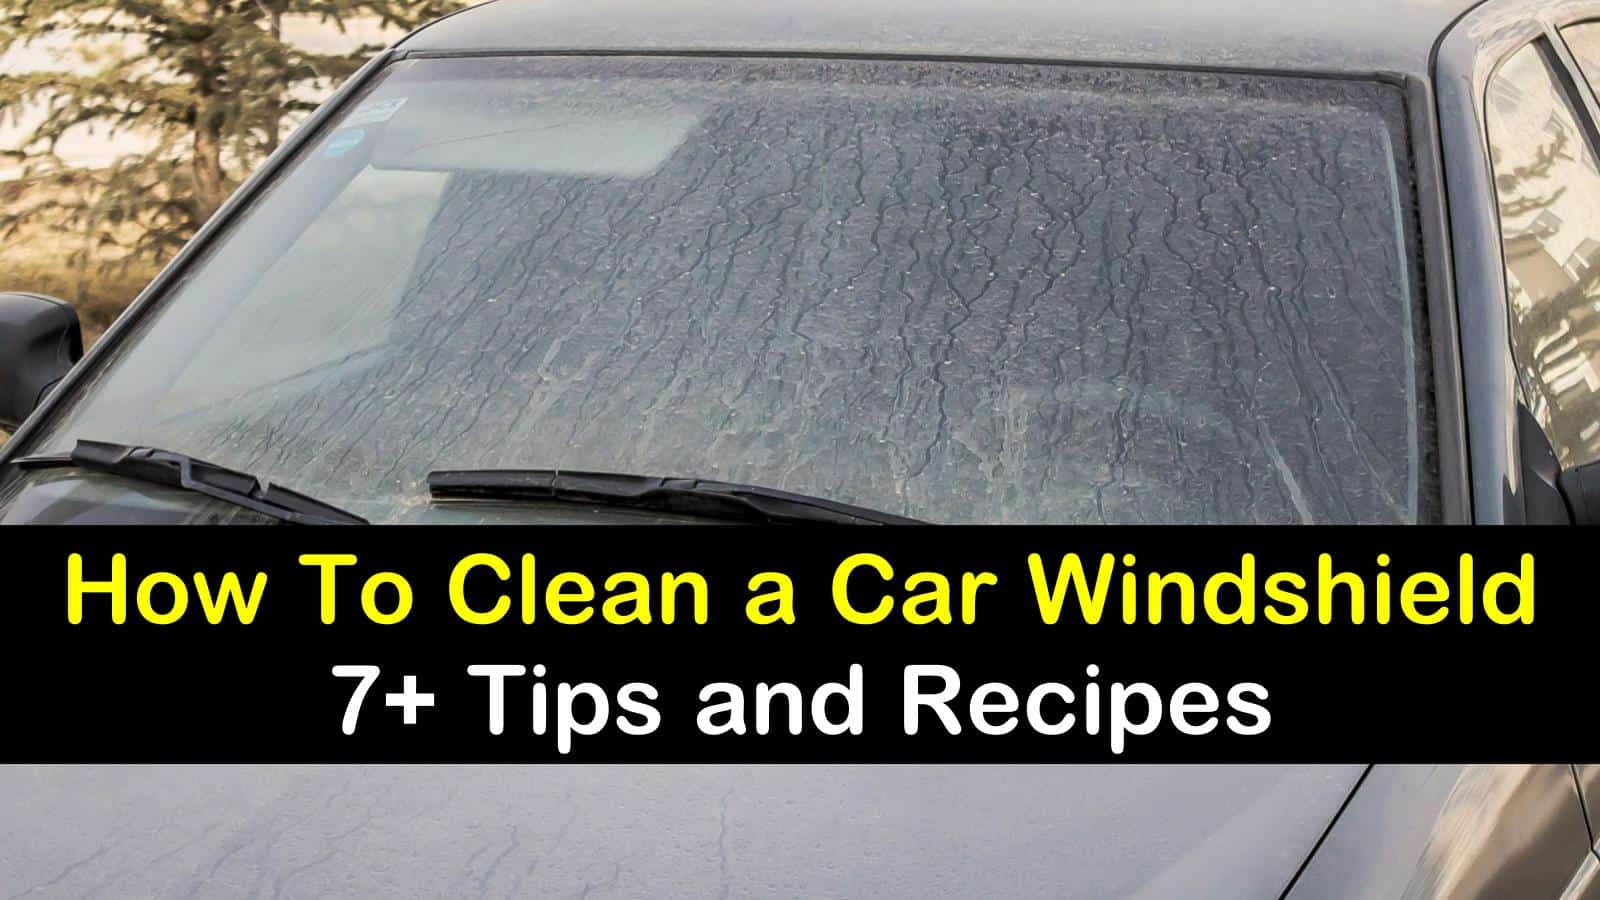 how to clean a car windshield titleimg1